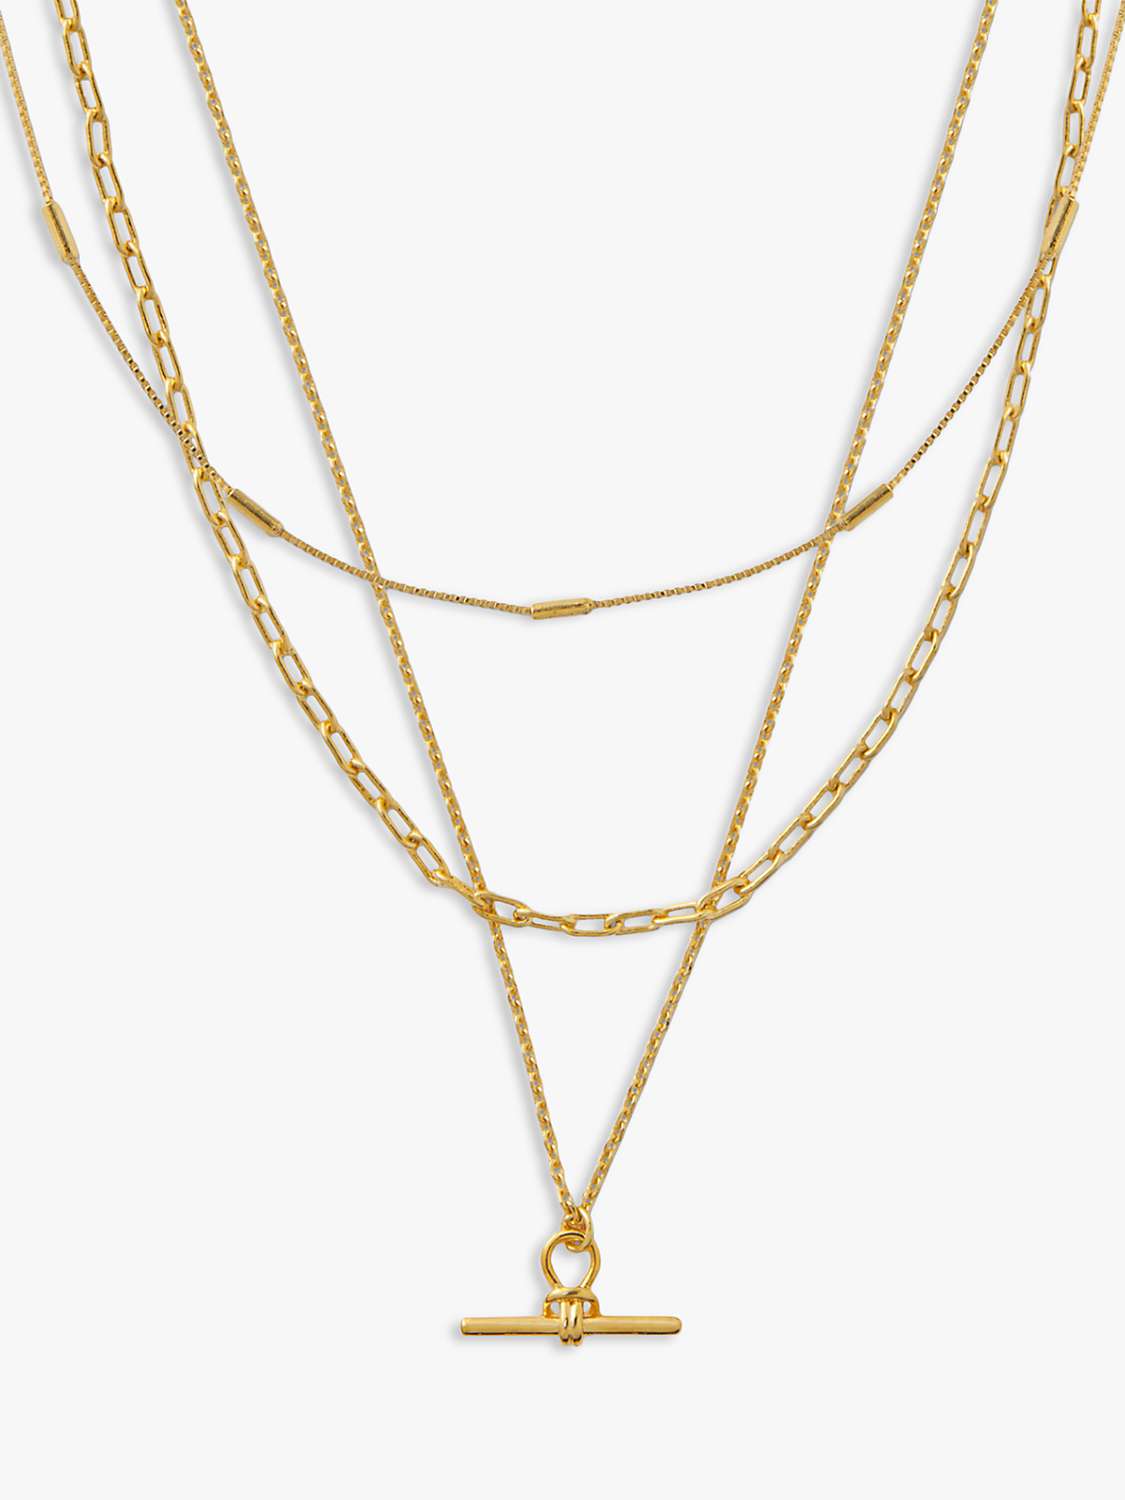 Buy Orelia Dainty Mixed Chain Layered Necklaces, Gold Online at johnlewis.com